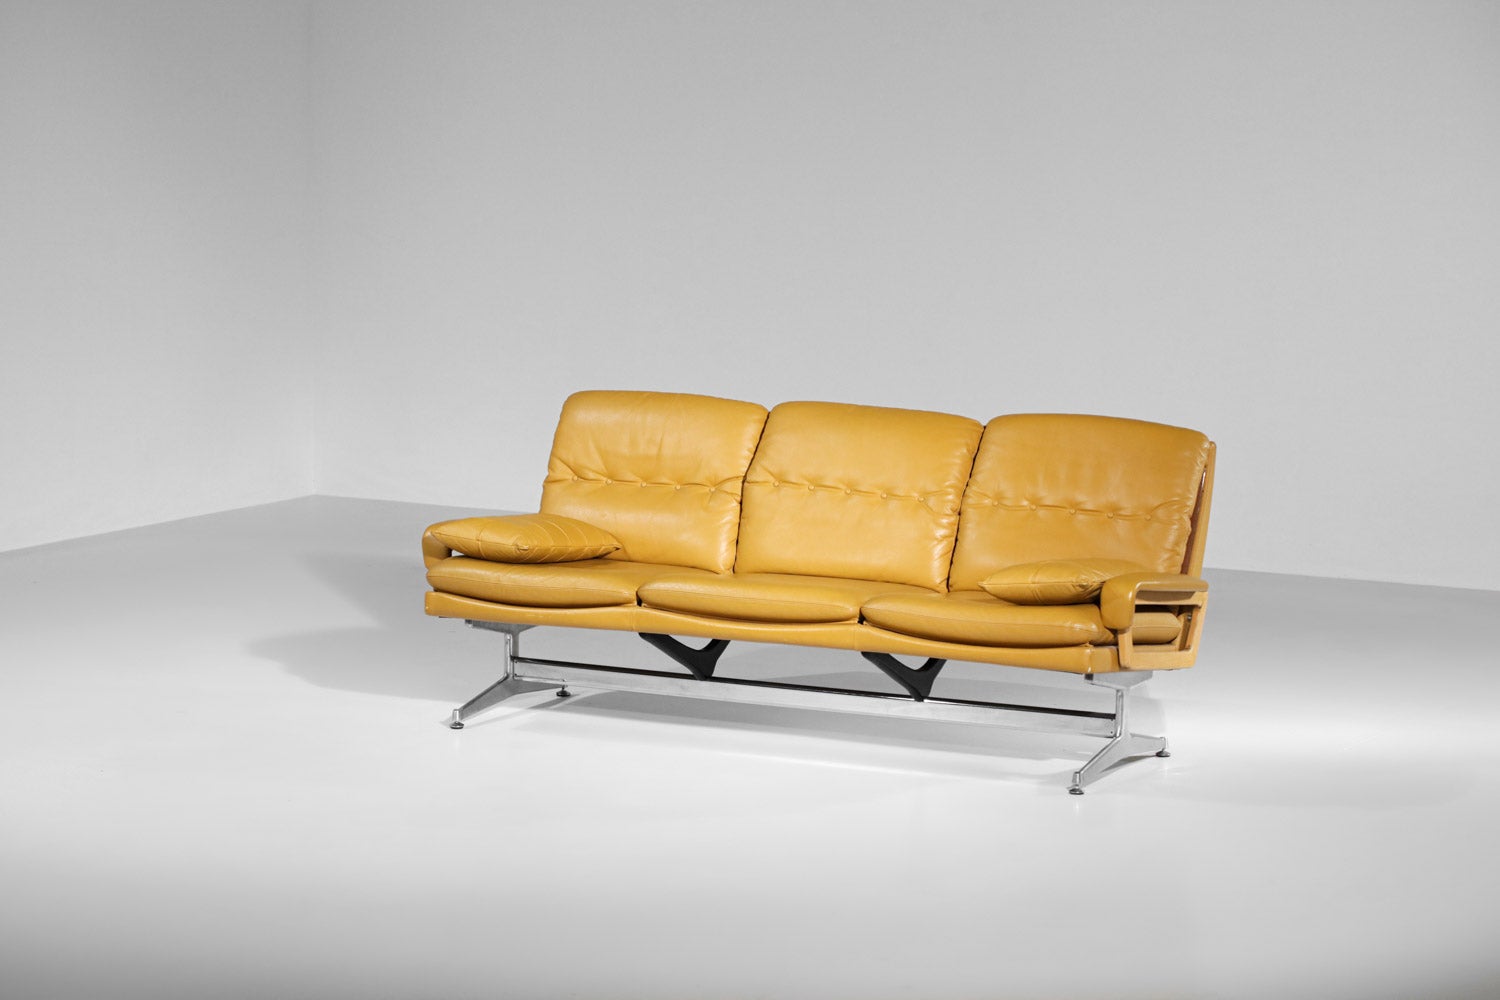 Large 3 seater sofa from the 60's. Structure of the sofa in chromed steel, seat and back composed of different cushions in yellow leather. Sober and pure lines with a very nice vintage condition of the sofa, to note very slight traces of use and